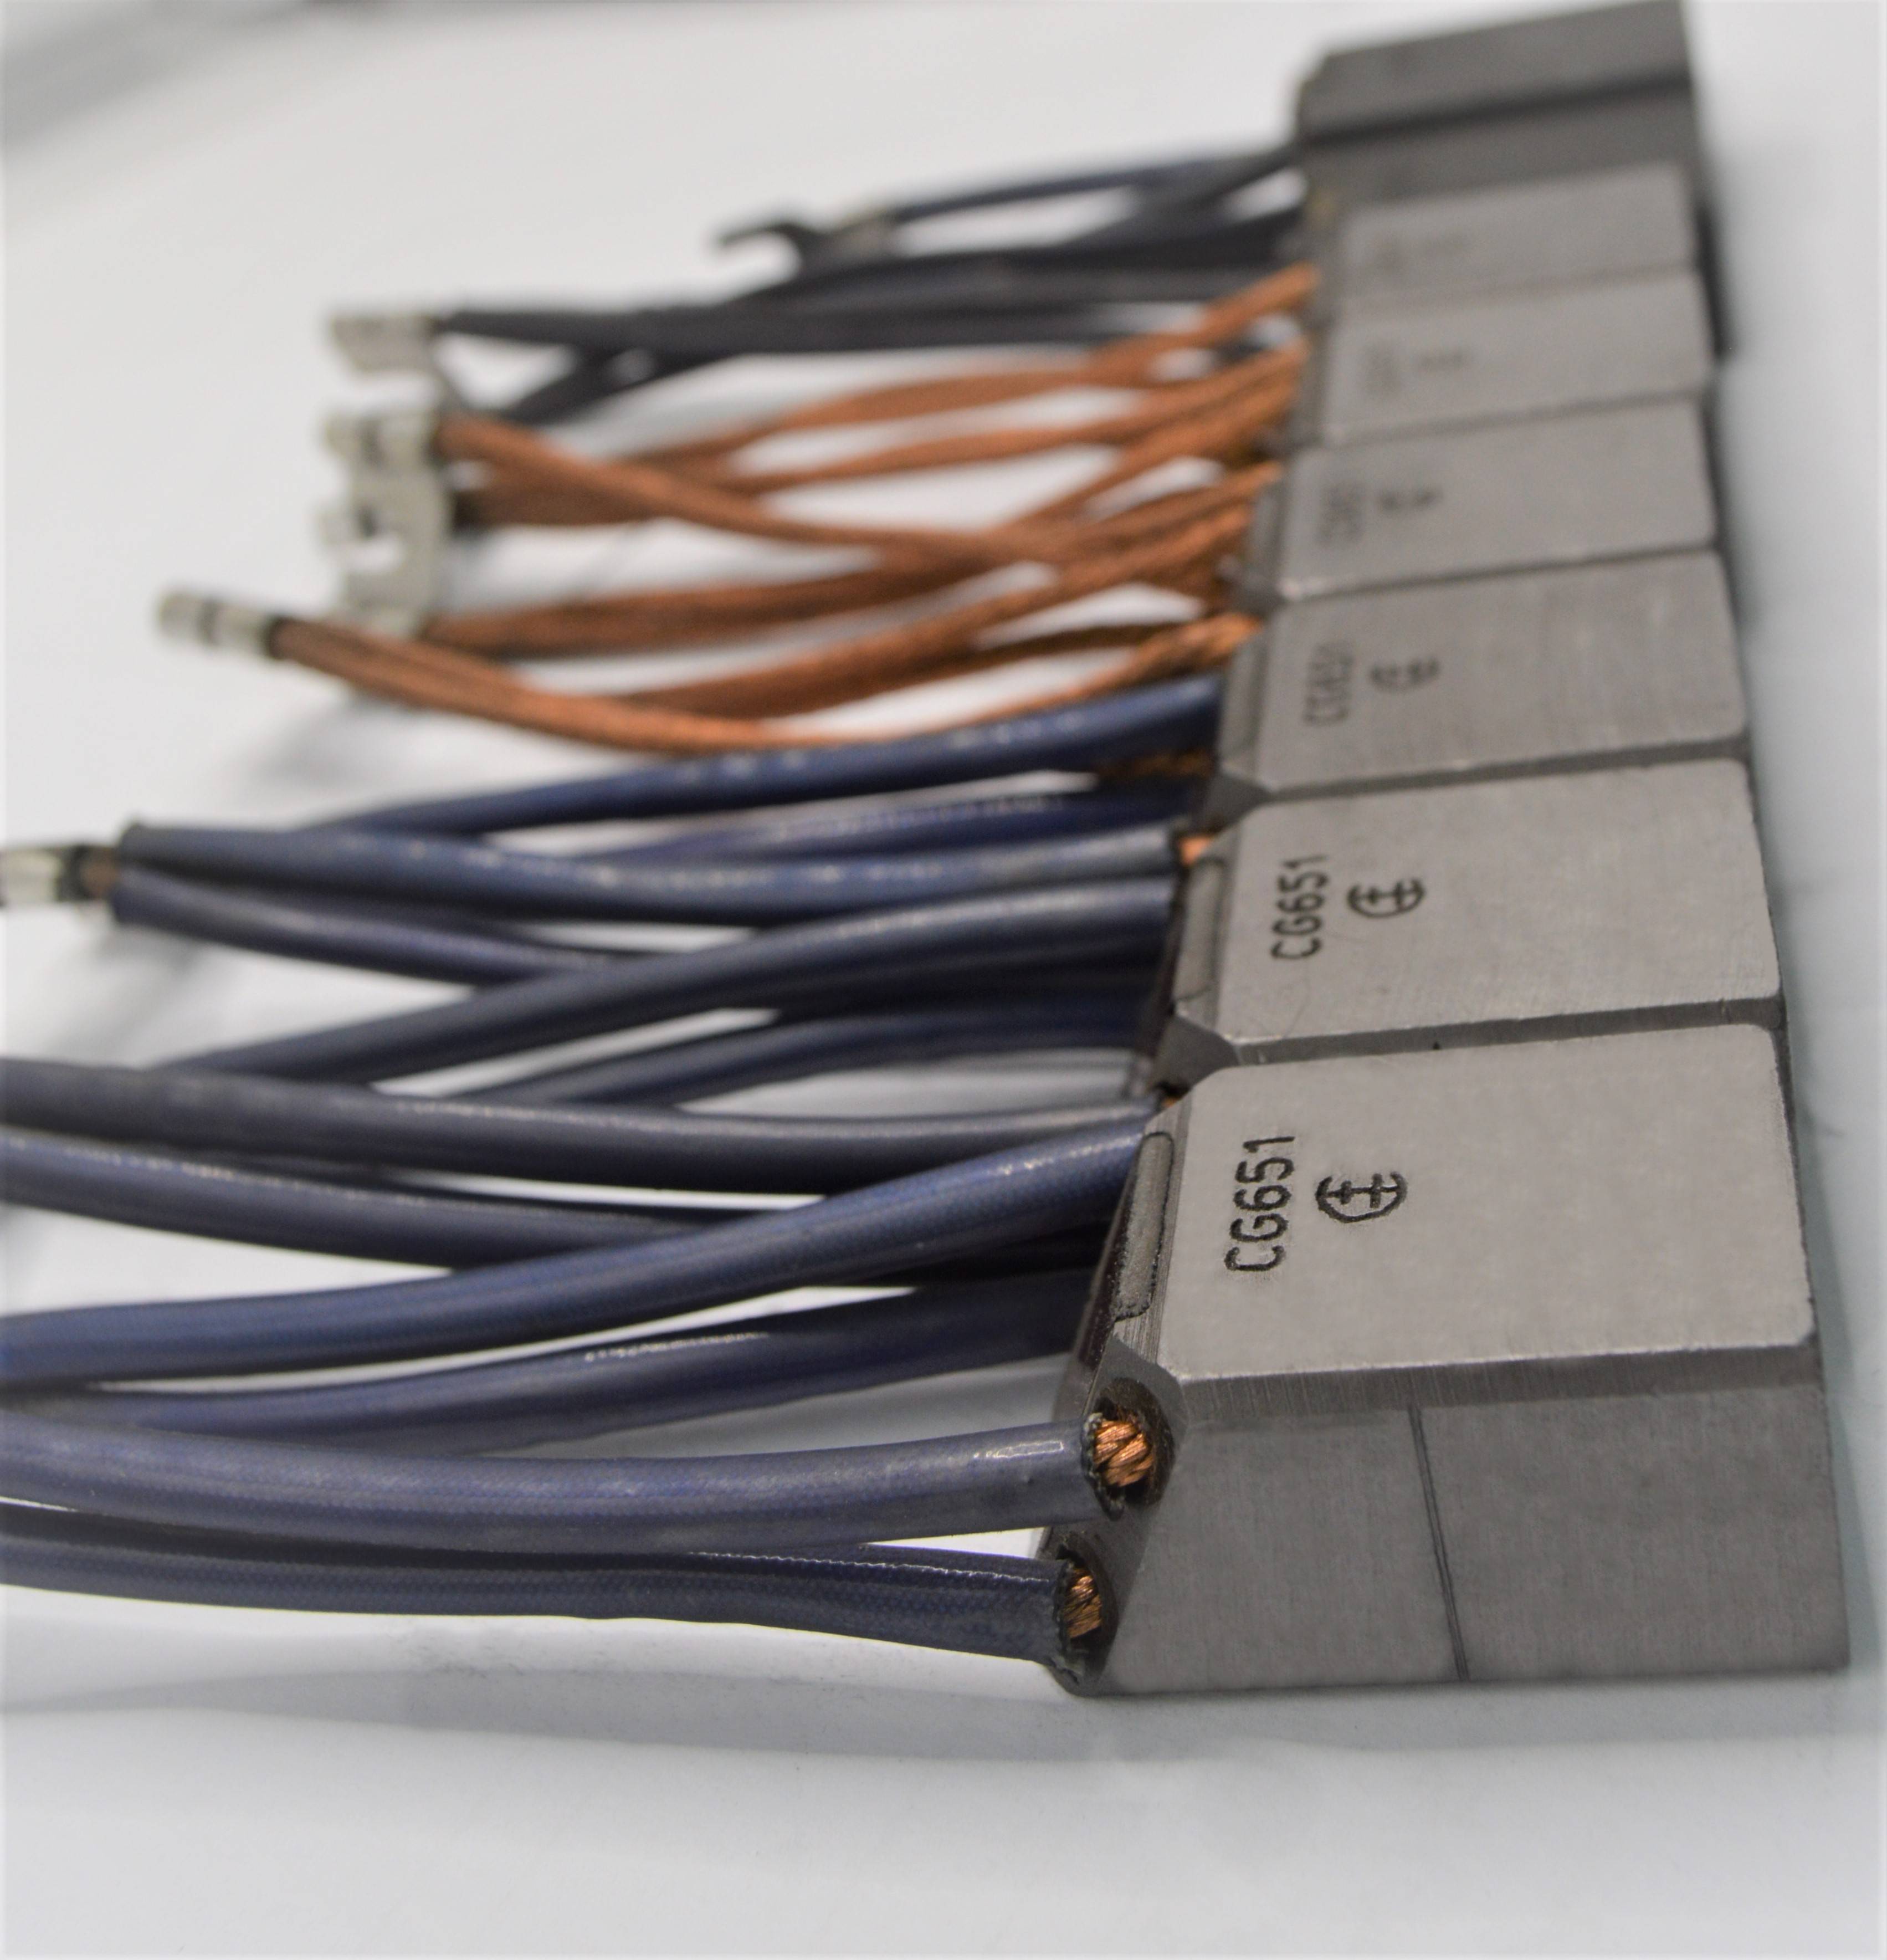 What's the difference between electric and fiber-optic slip rings?